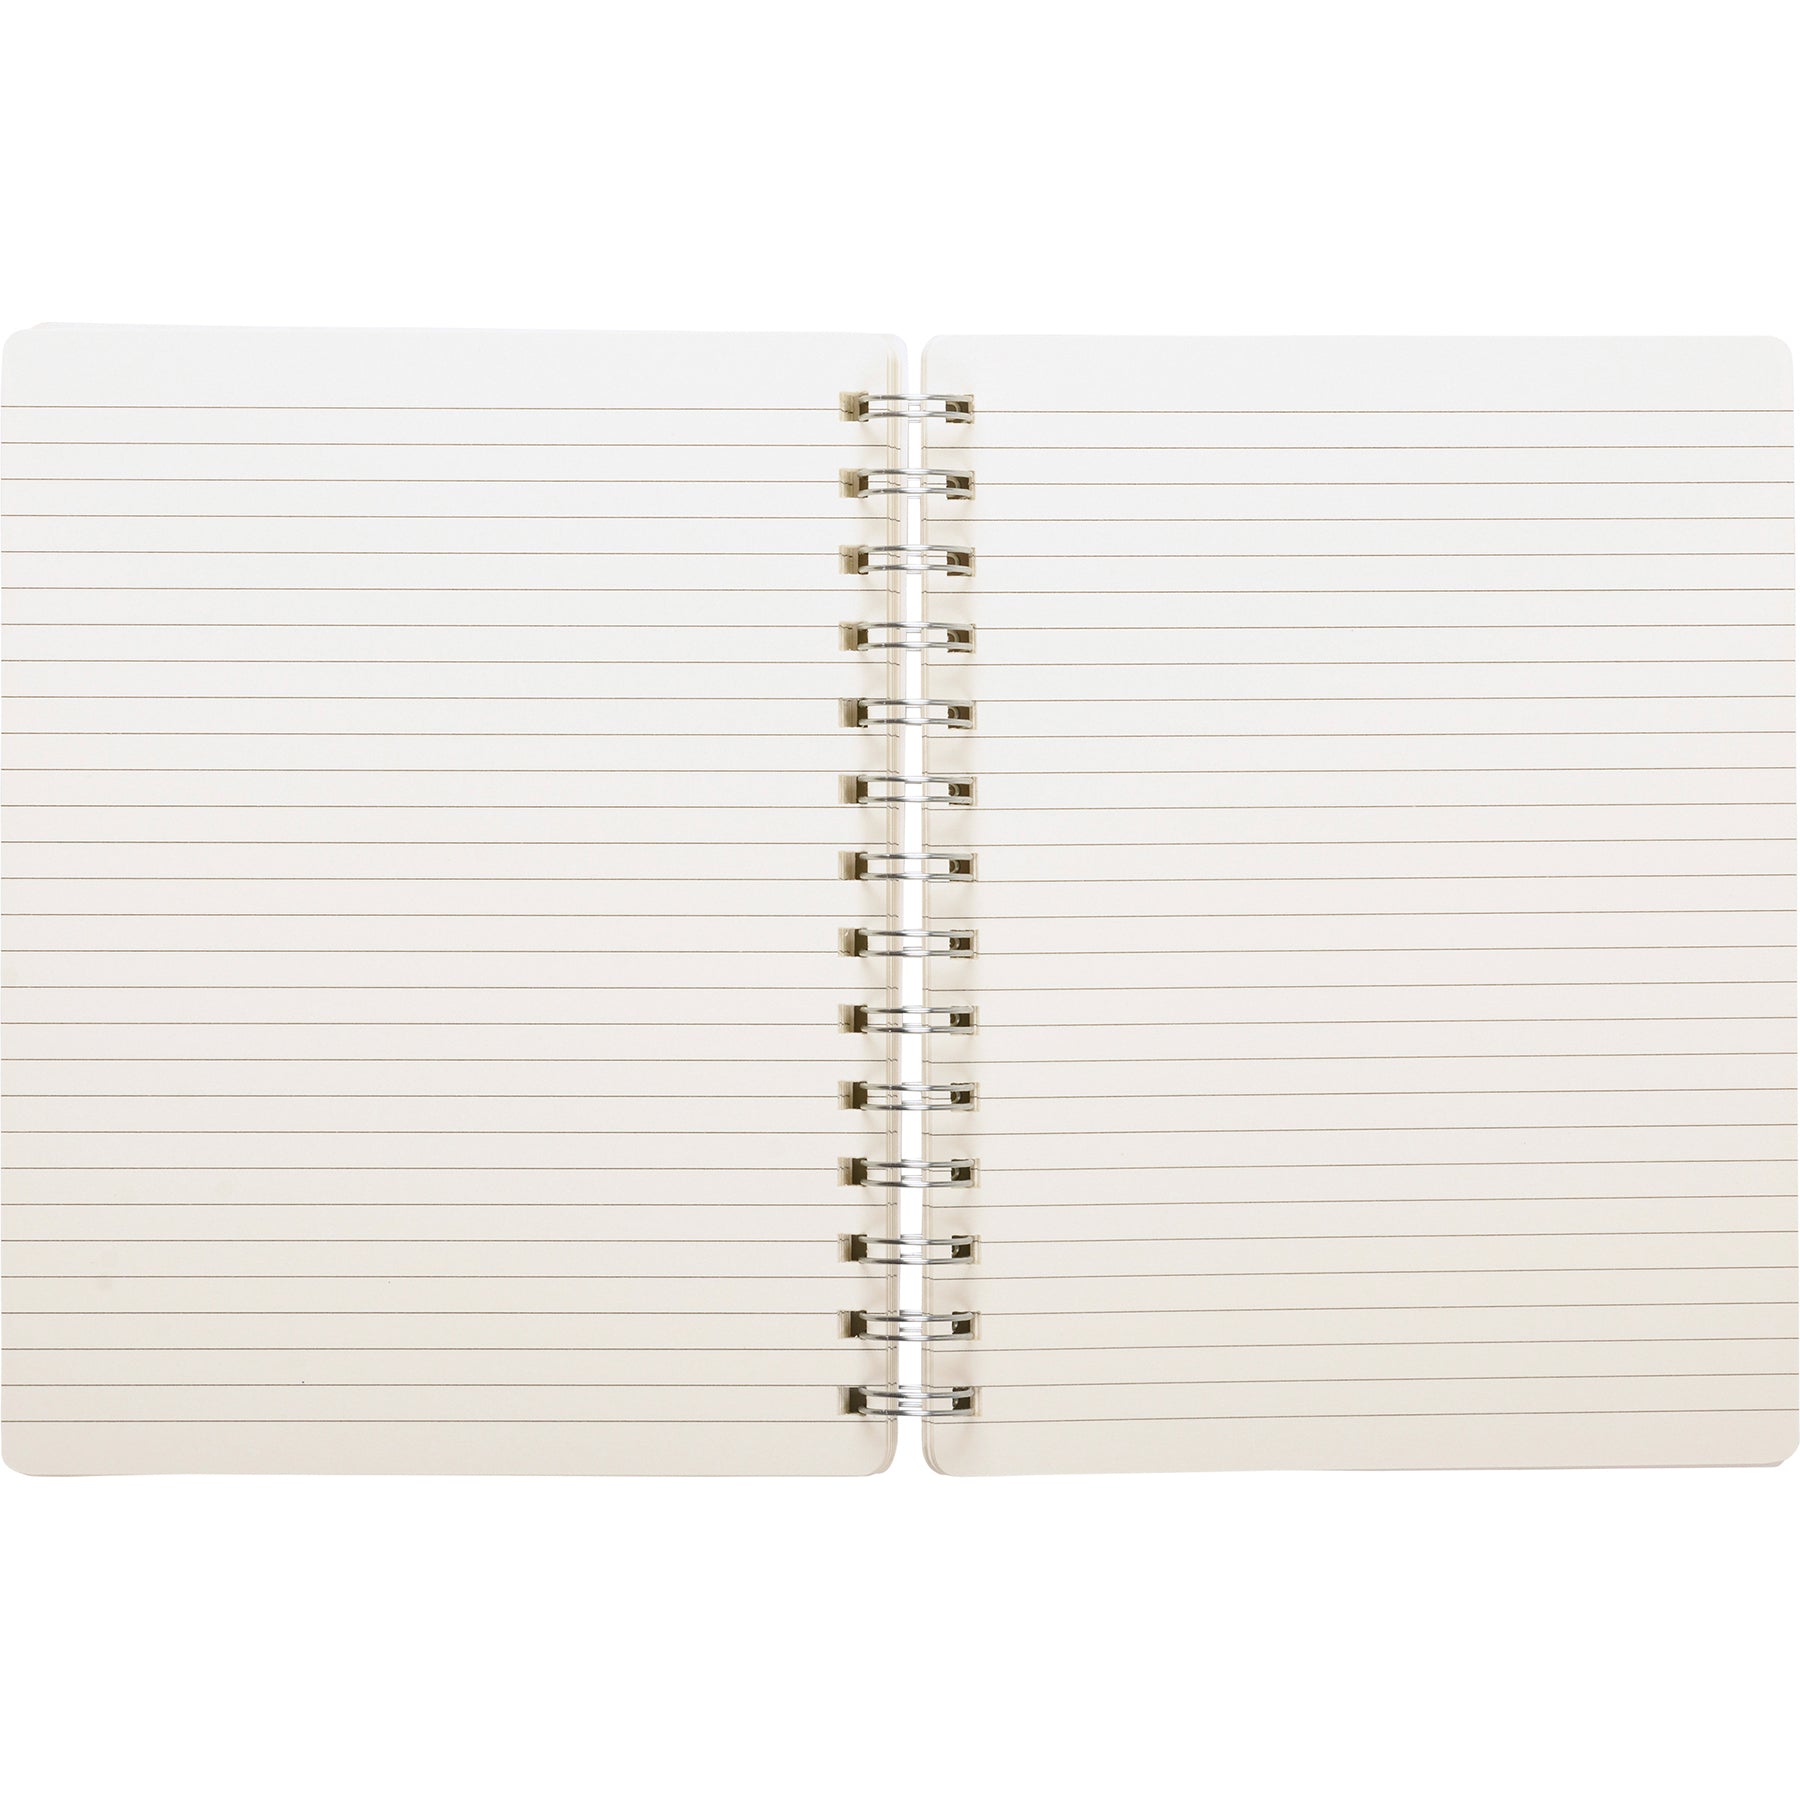 It's A Good Day To Have A Great Day Spiral Notebook | Art on Both Sides | 5.75" x 7.50" | 120 Lined Pages